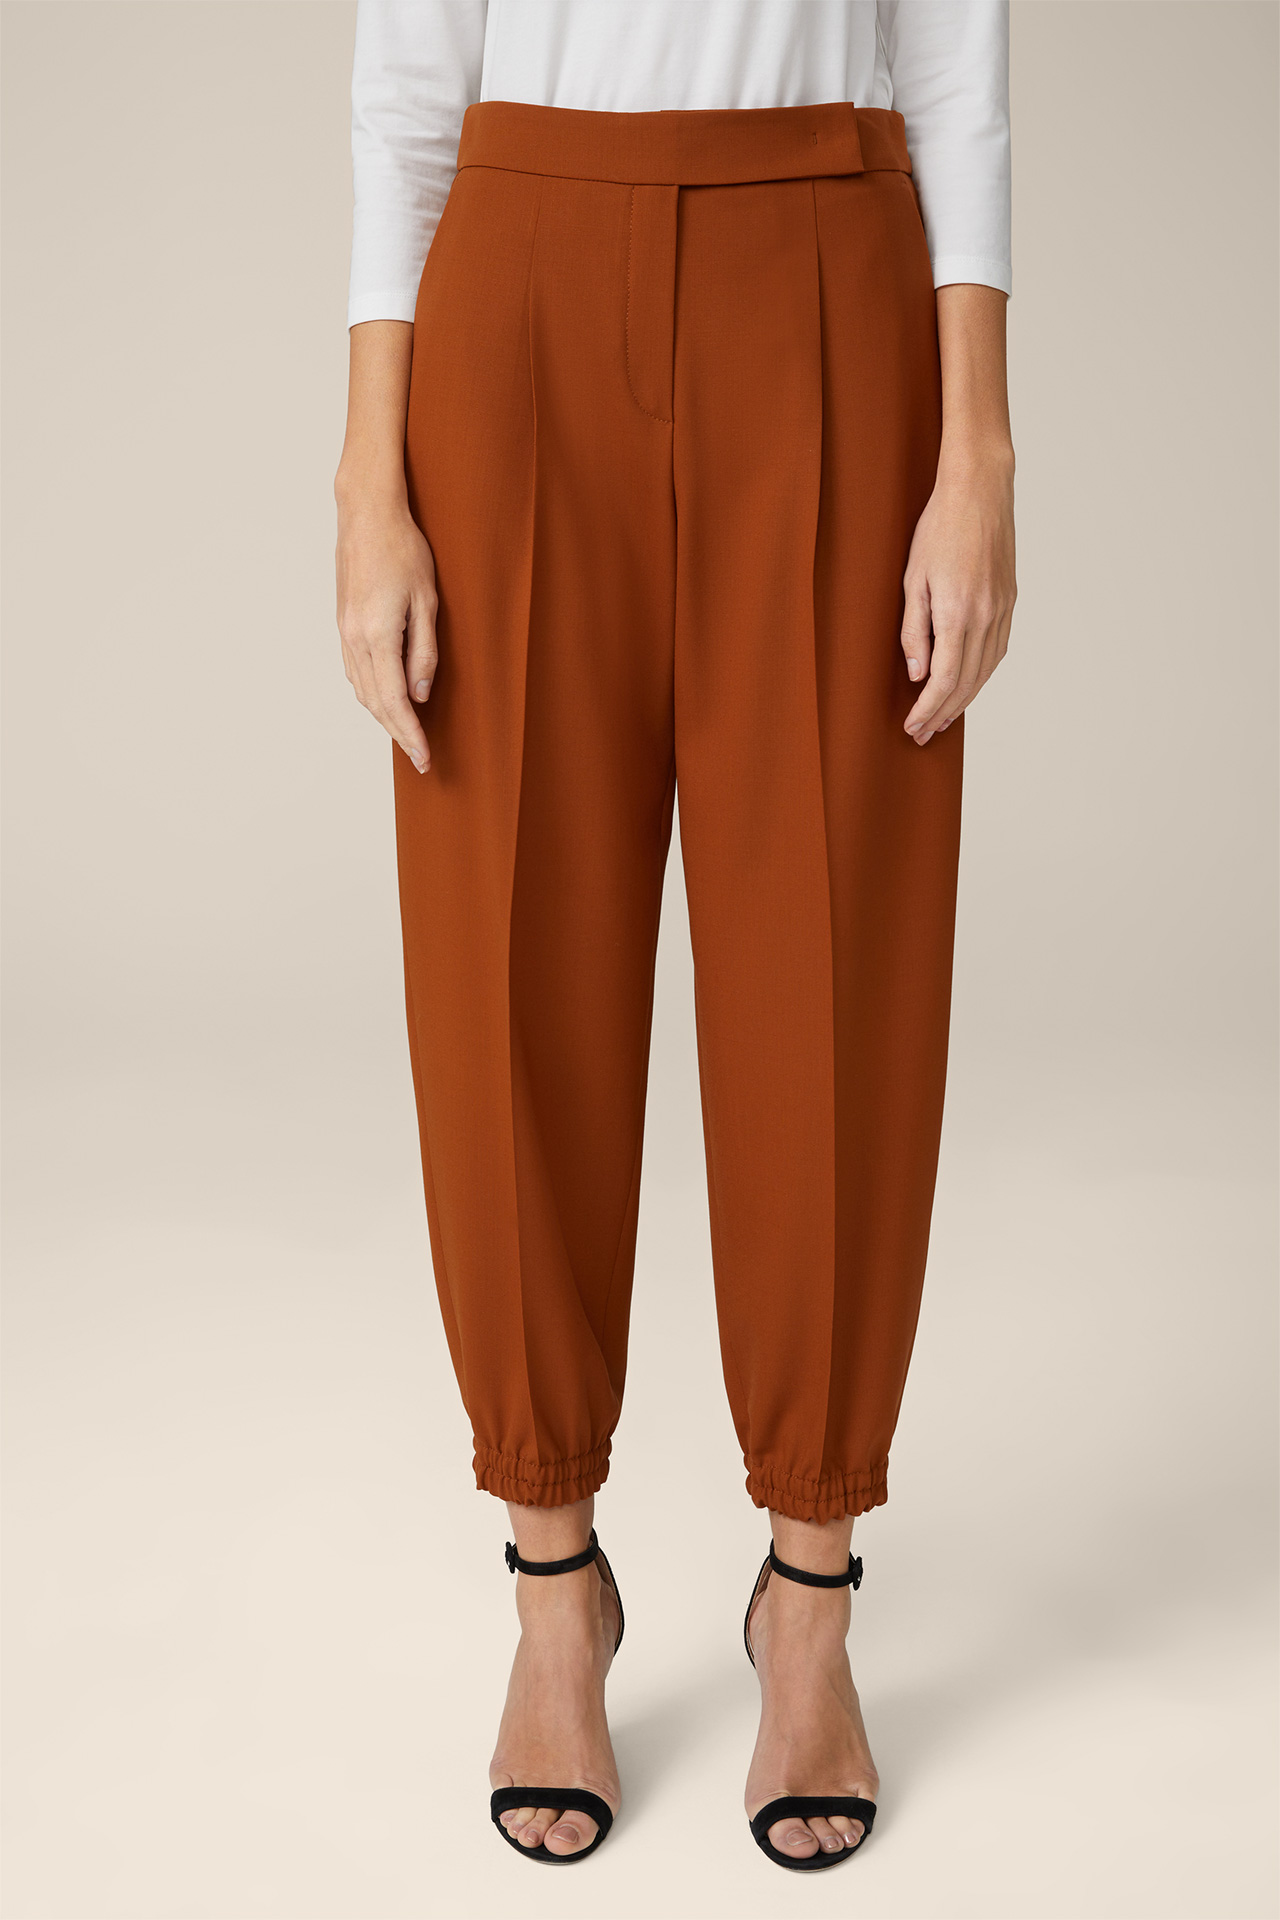 Wool Stretch Copper Jogger-Style Trousers in Copper